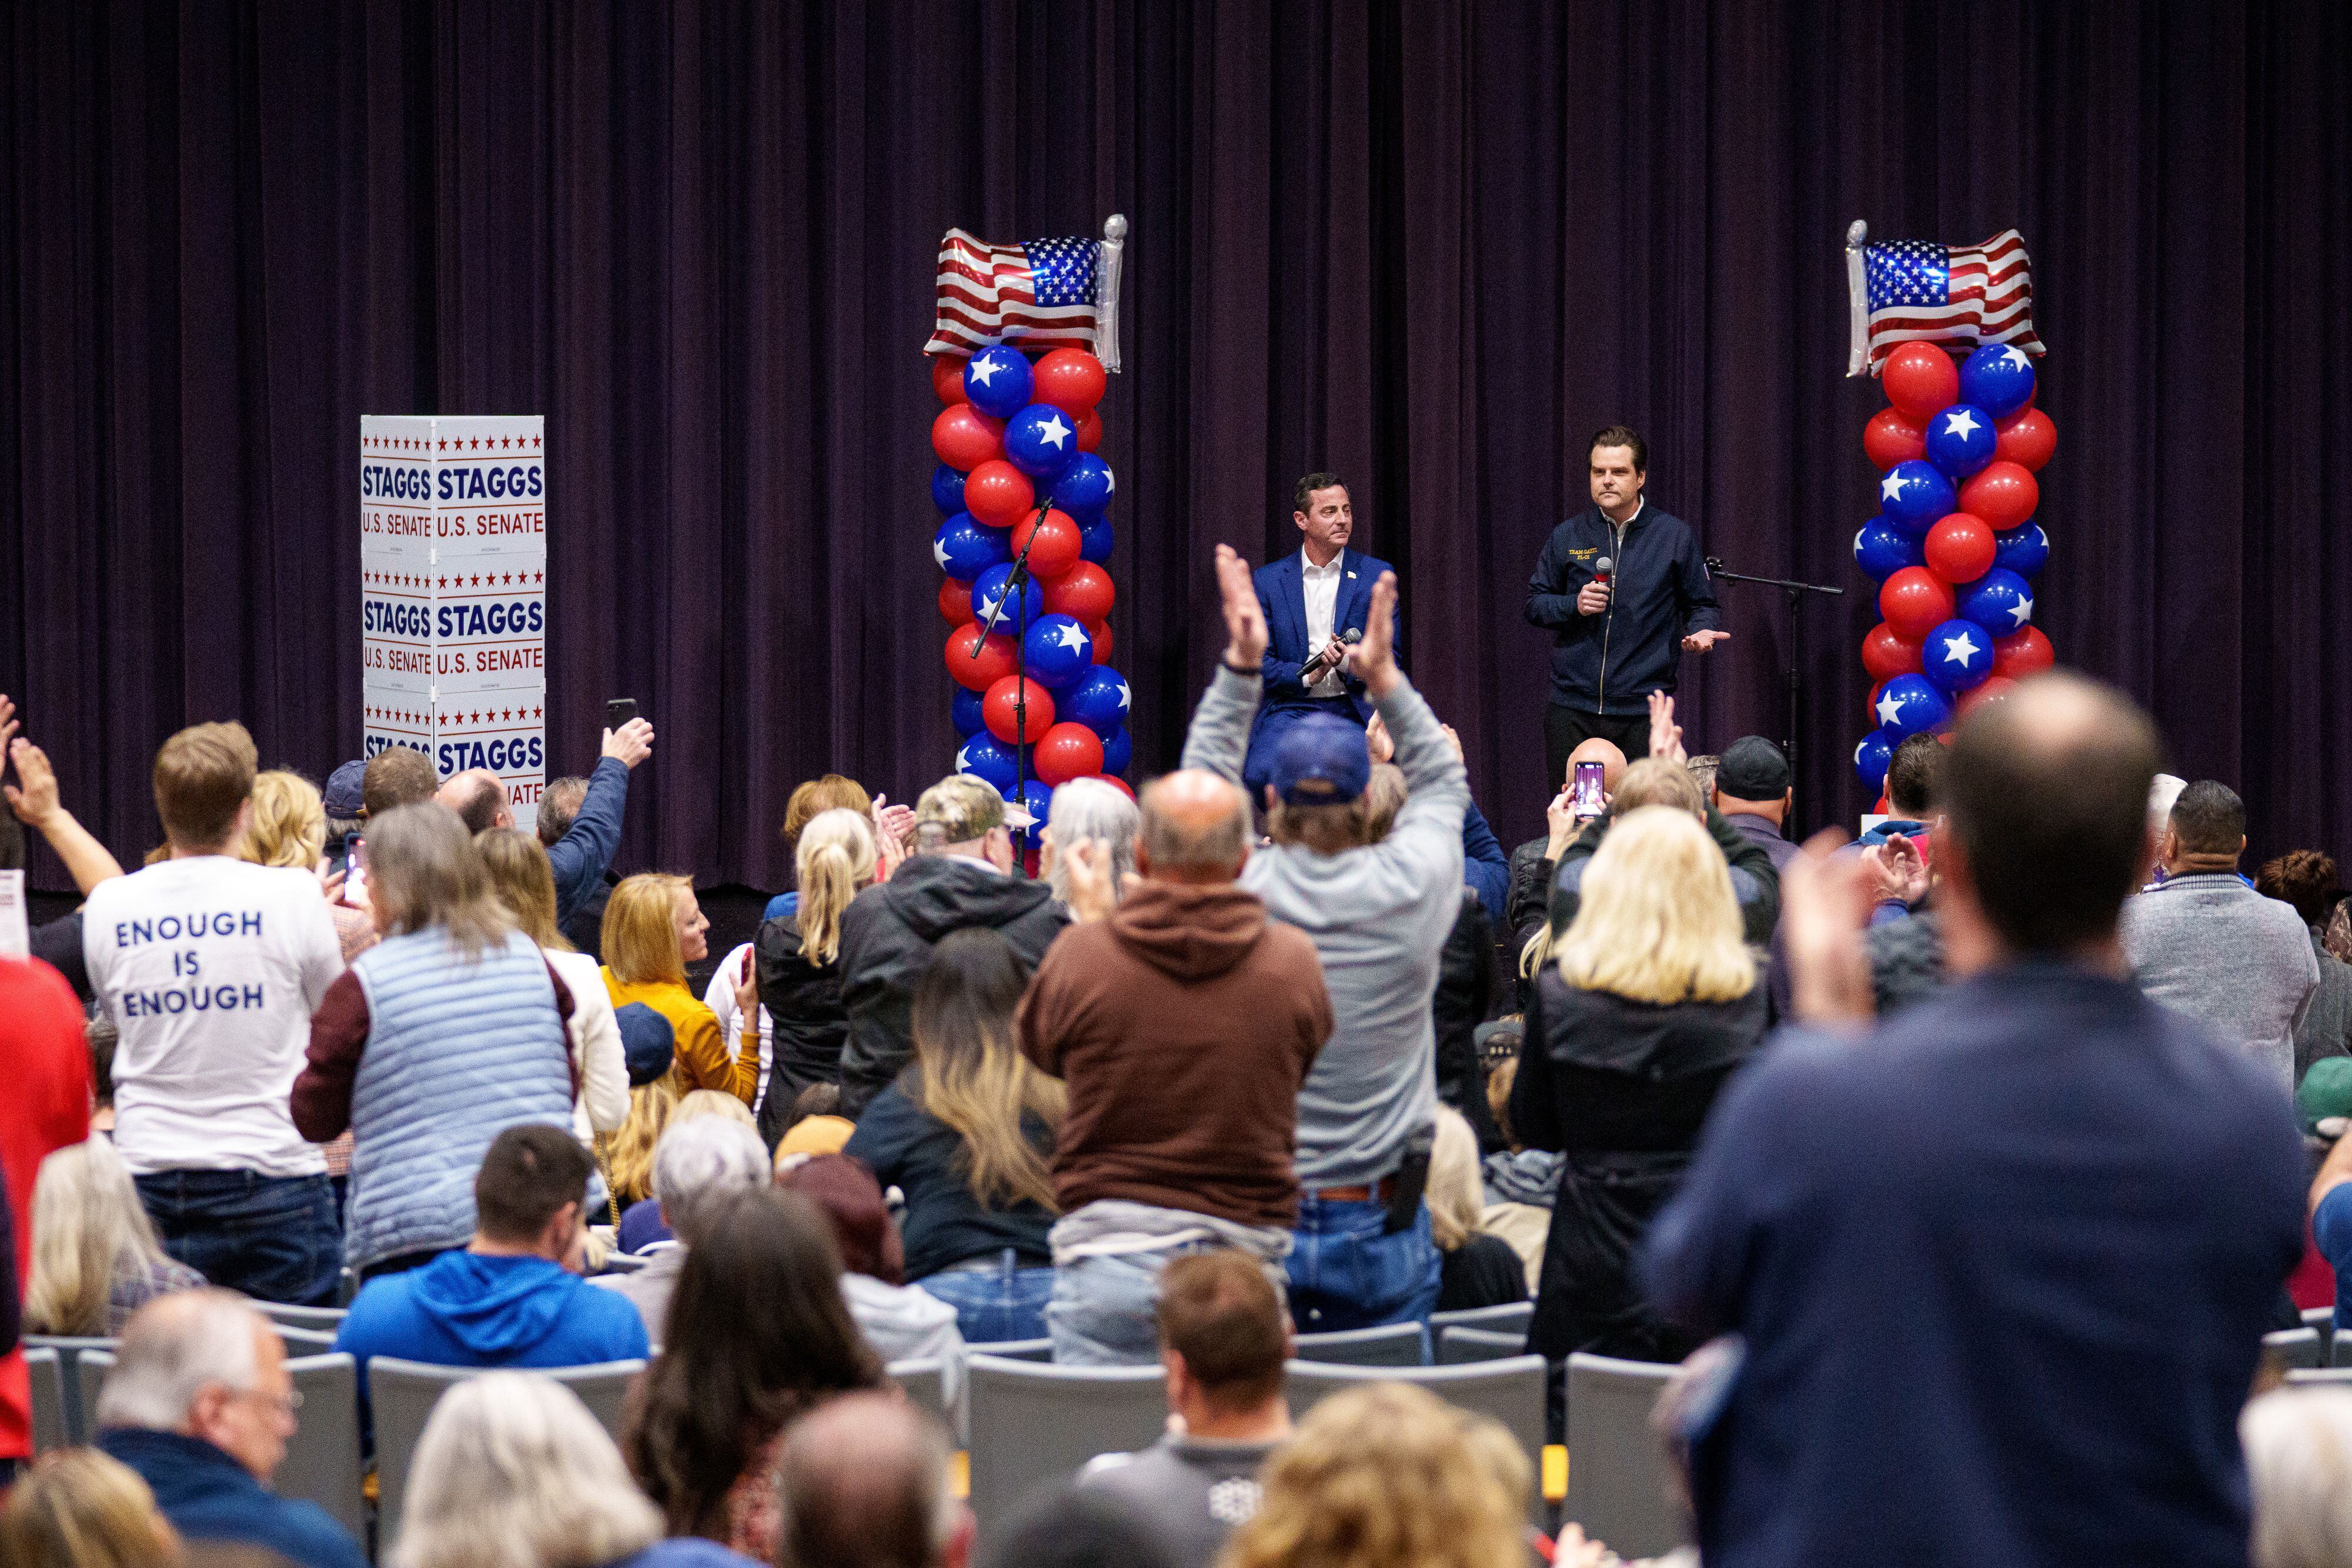 (Trent Nelson  |  The Salt Lake Tribune) Attendees applaud U.S. Senate candidate Trent Staggs and U.S. Rep. Matt Gaetz, R-Fla., at a town hall at Riverton High School on Thursday, March 28, 2024.